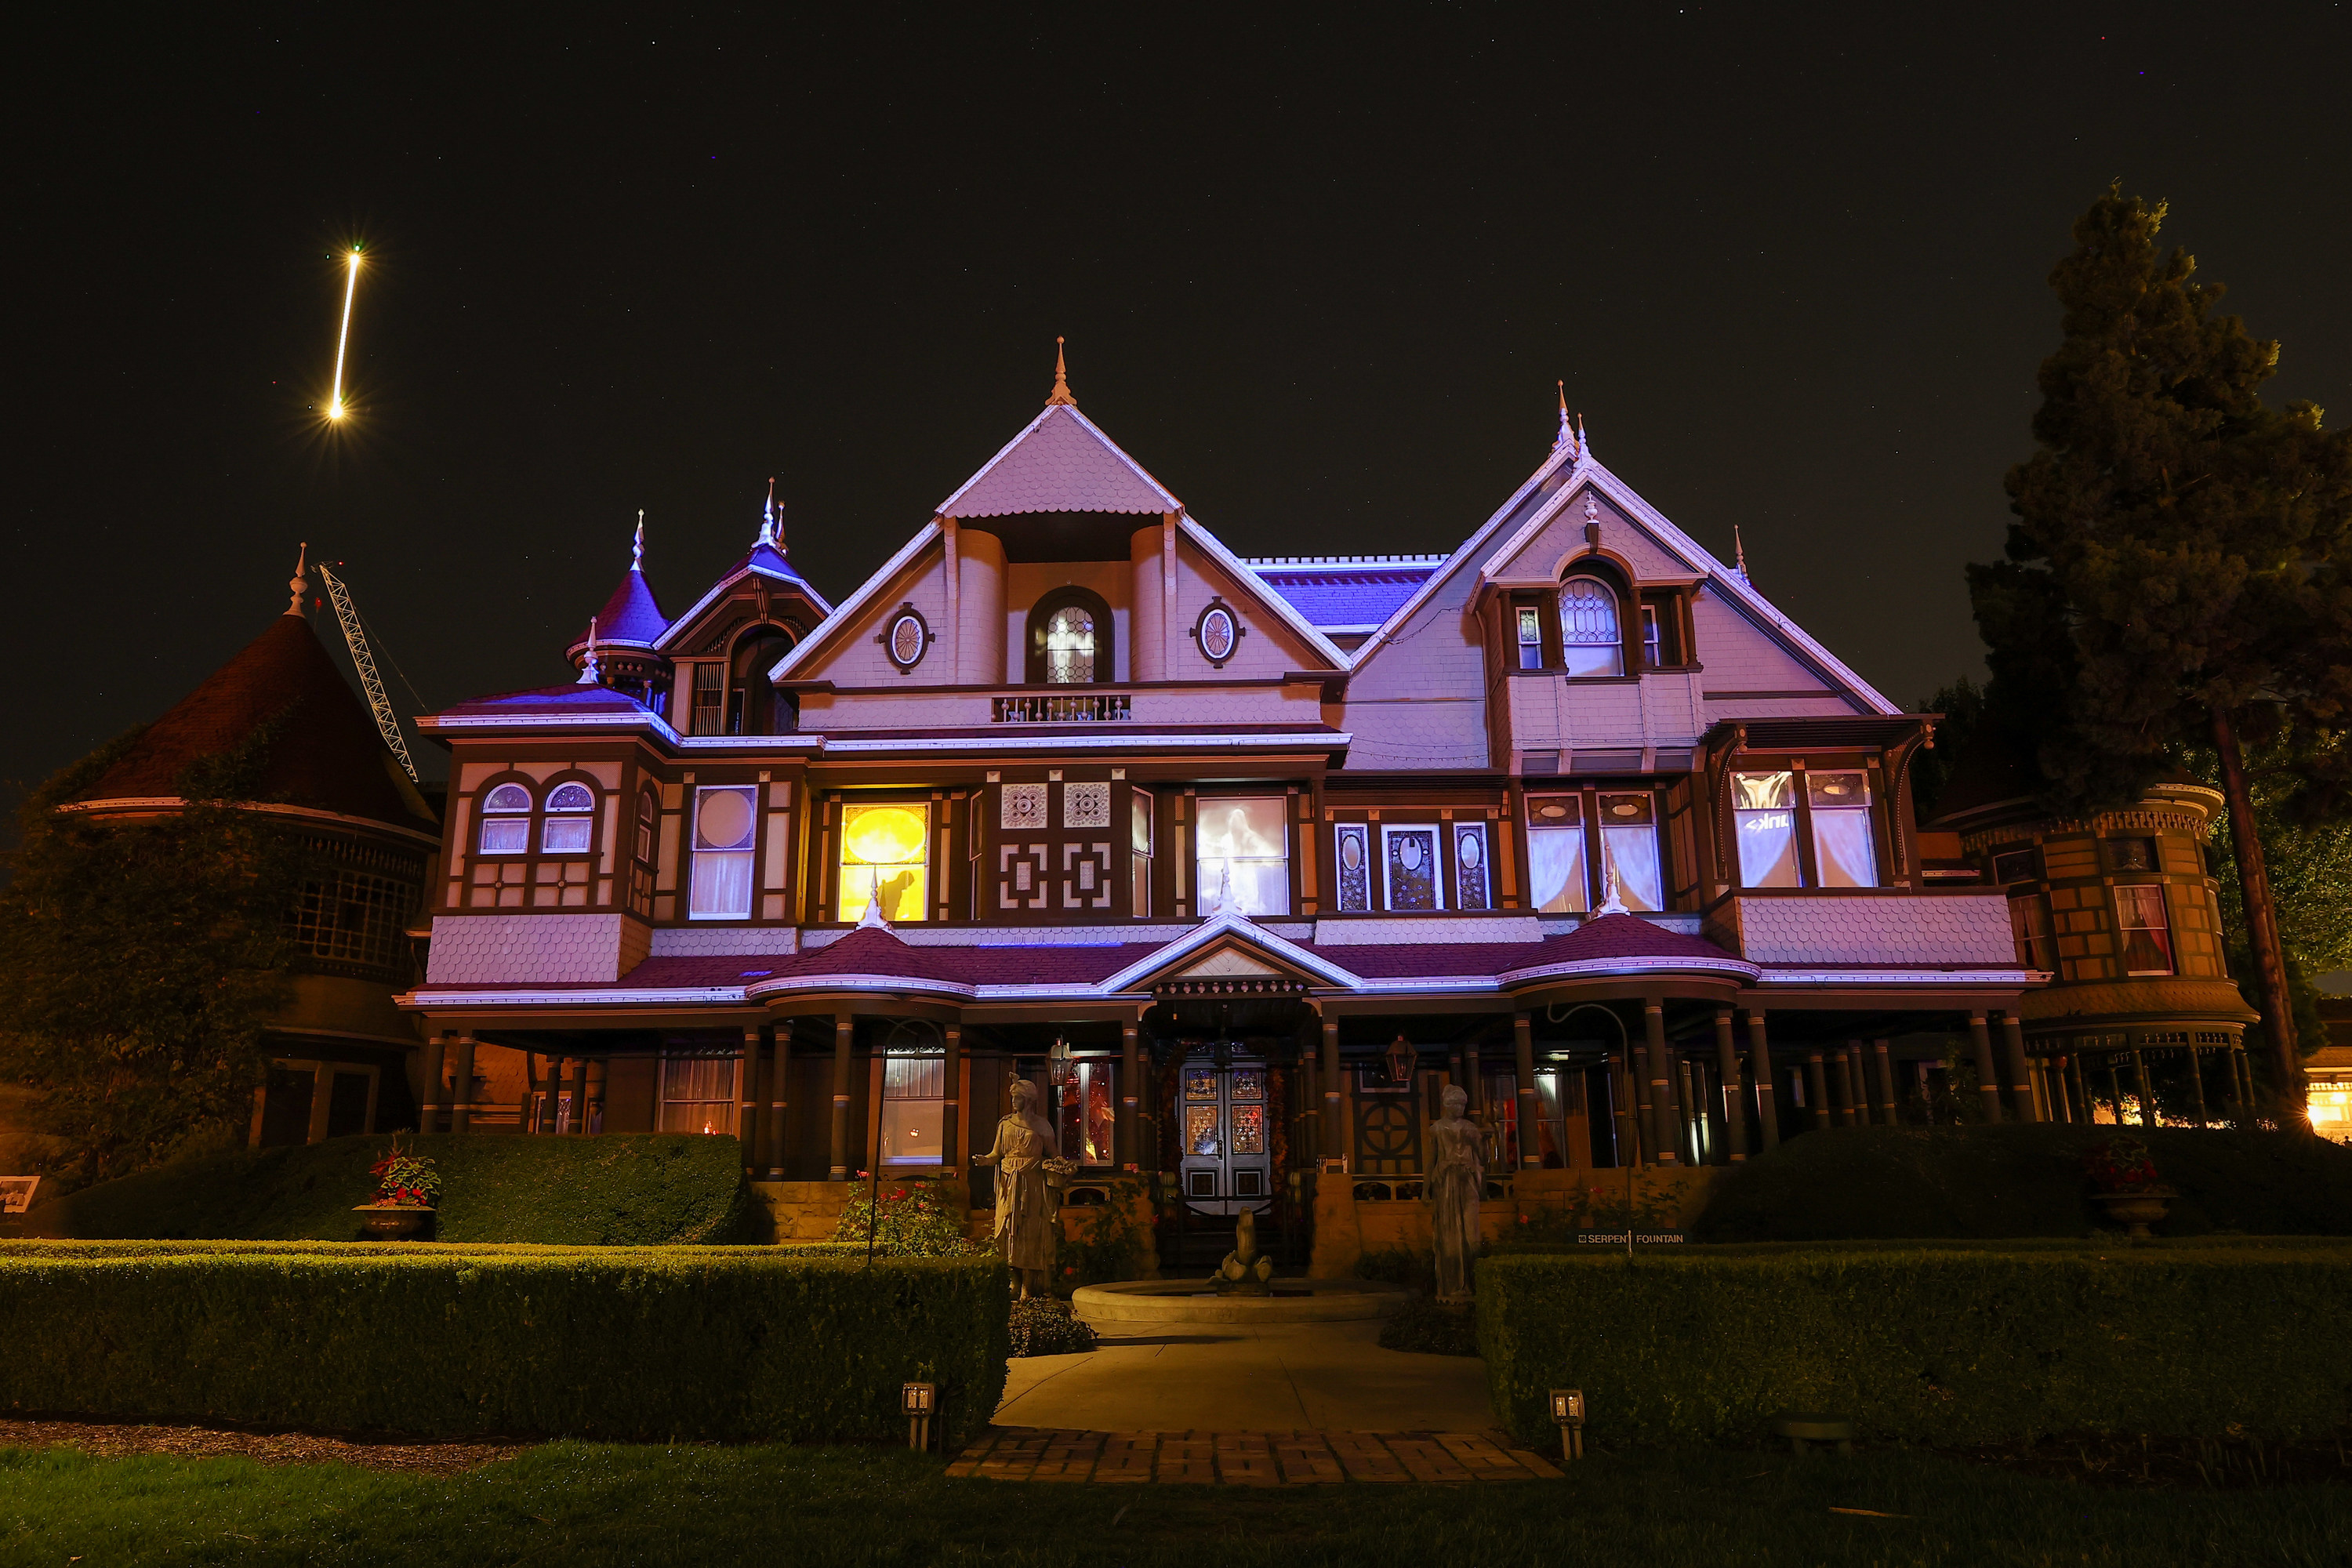 Old house lit up at night